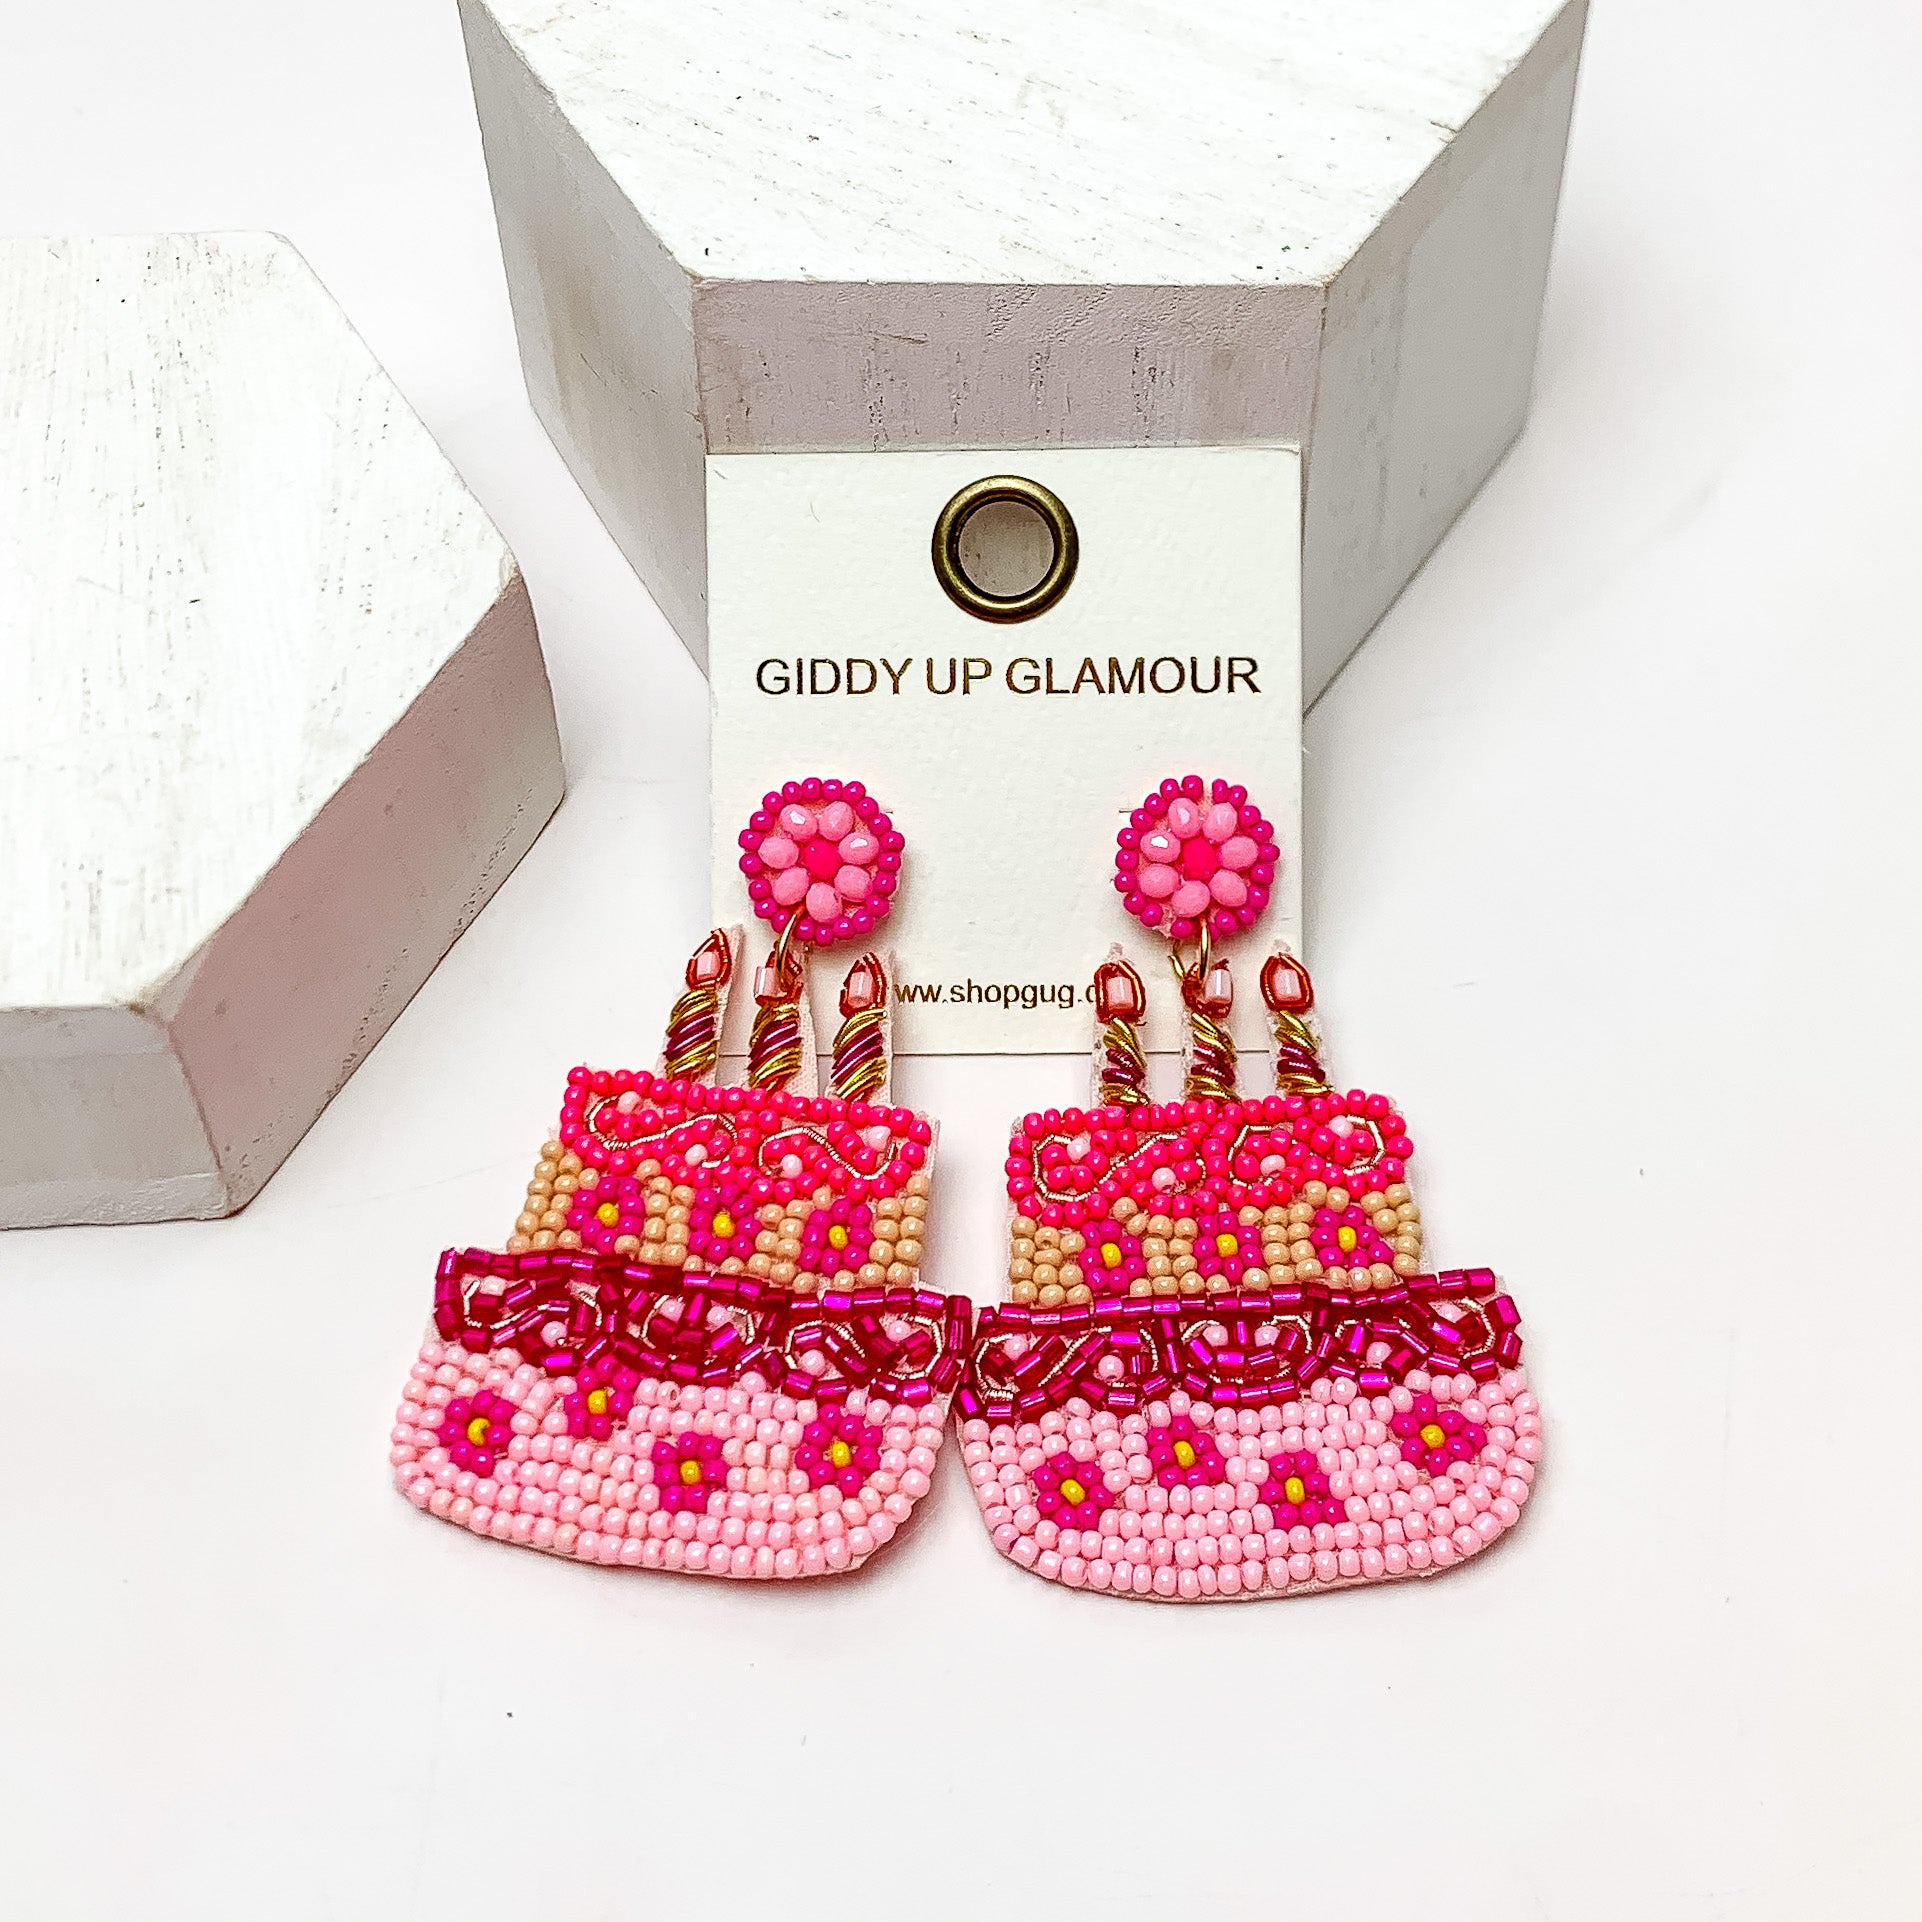 Birthday Cake Beaded Earrings in Hot Pink. These earrings are on a white background and have white posts around them.